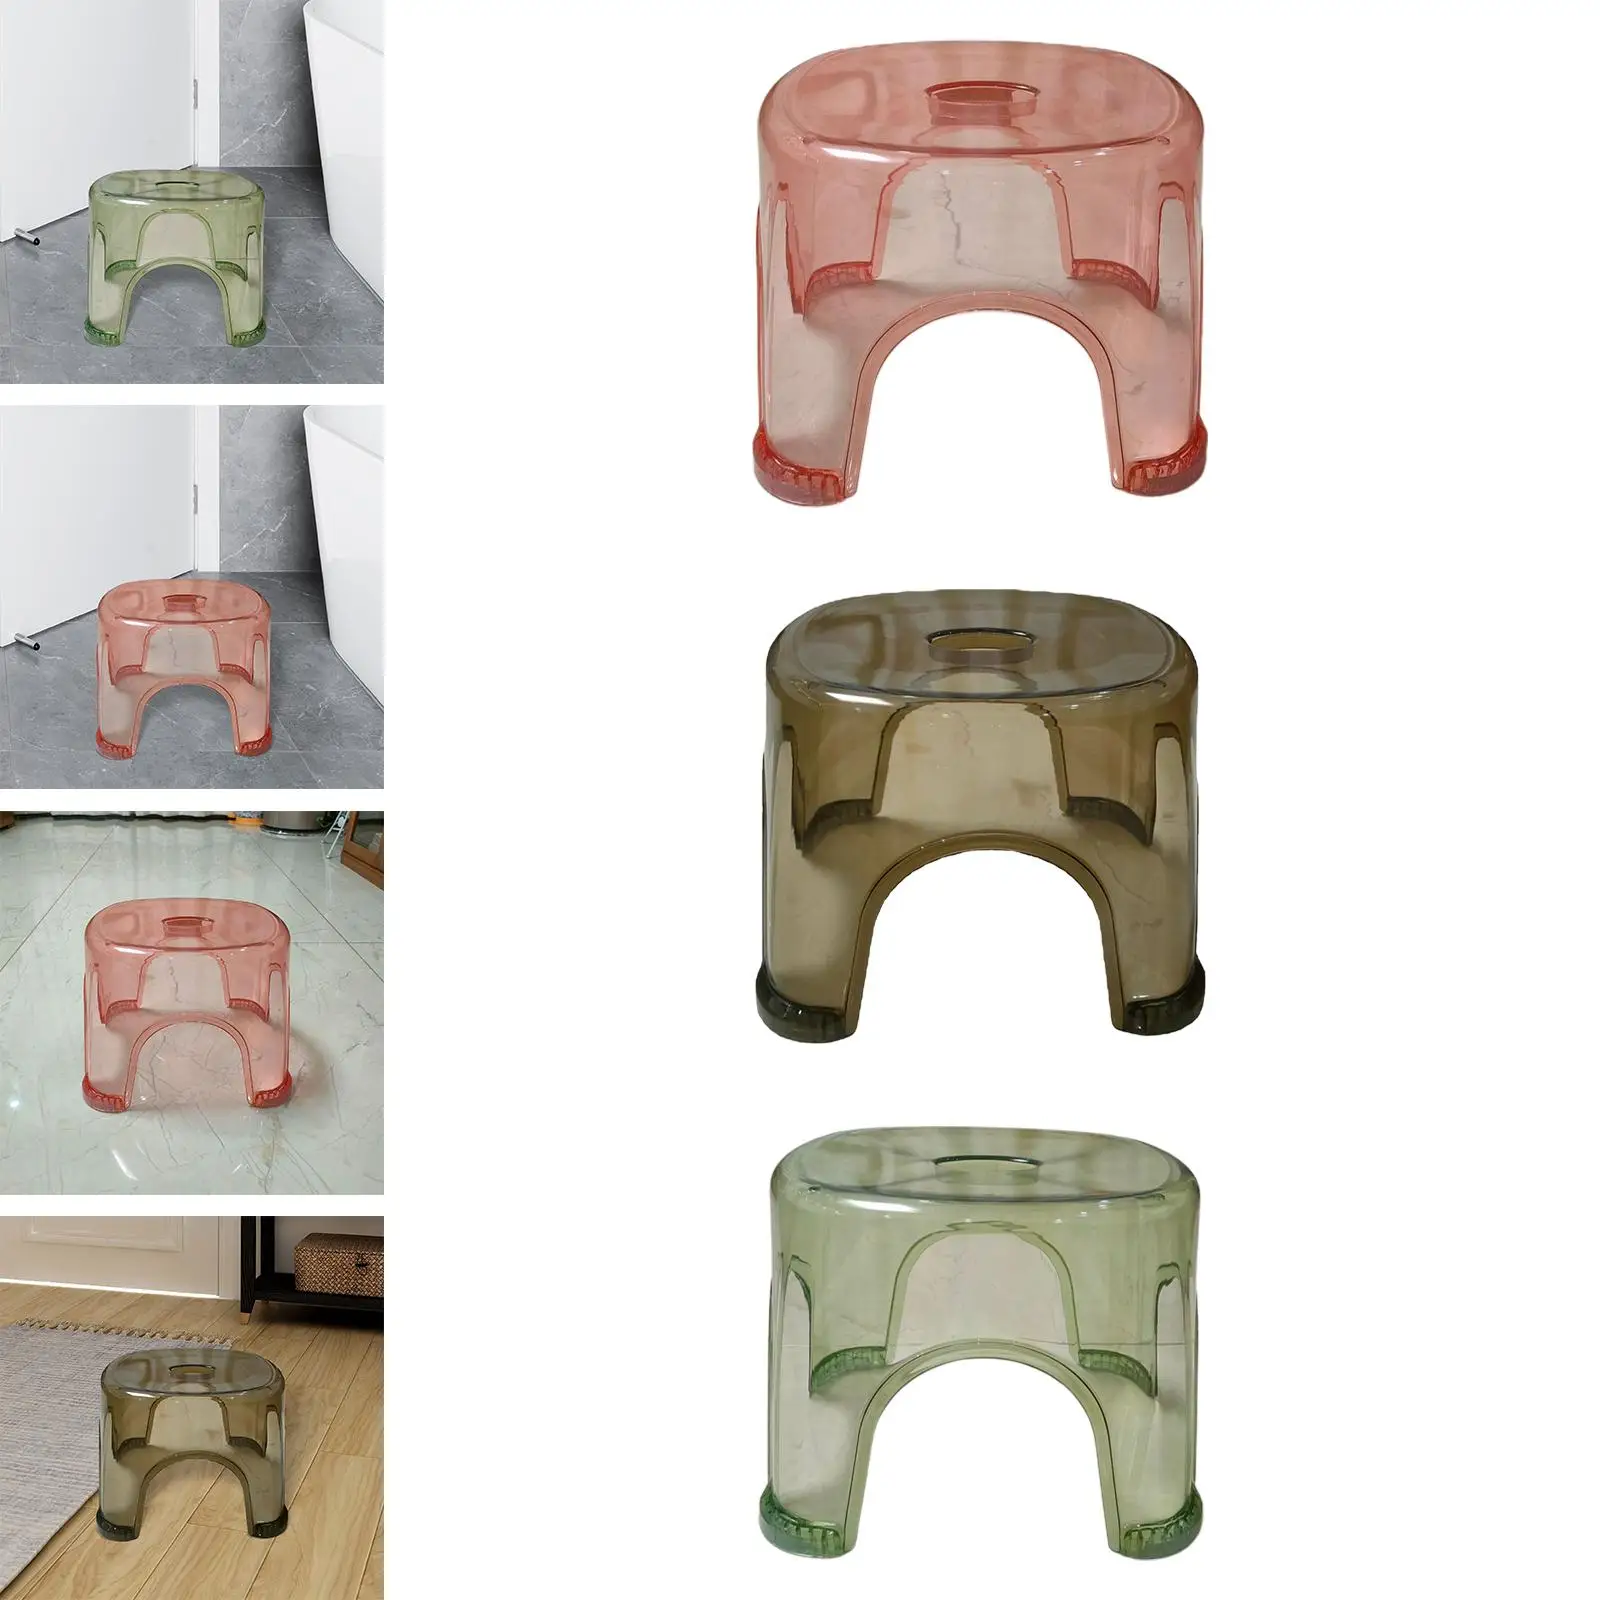 Small Stool Sturdy Lightweight Stable Step Stool Shoe Stool Potty Stool for Bedside Apartment Multi Scene Bedroom Living Room